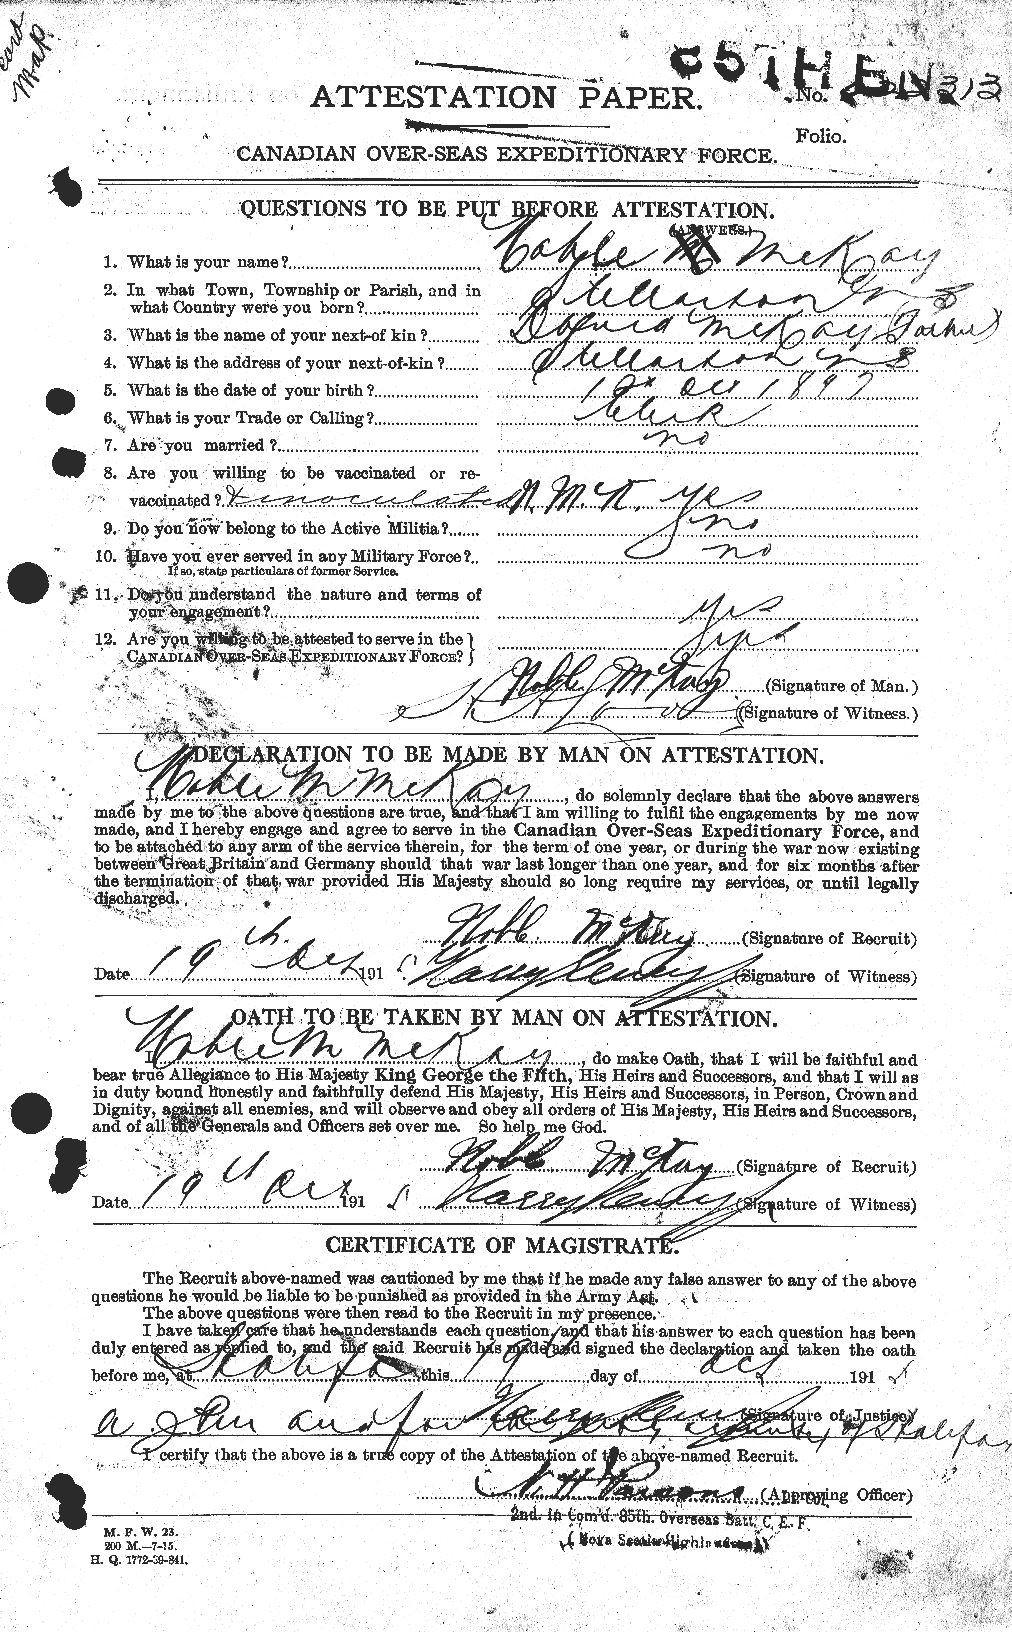 Personnel Records of the First World War - CEF 527210a